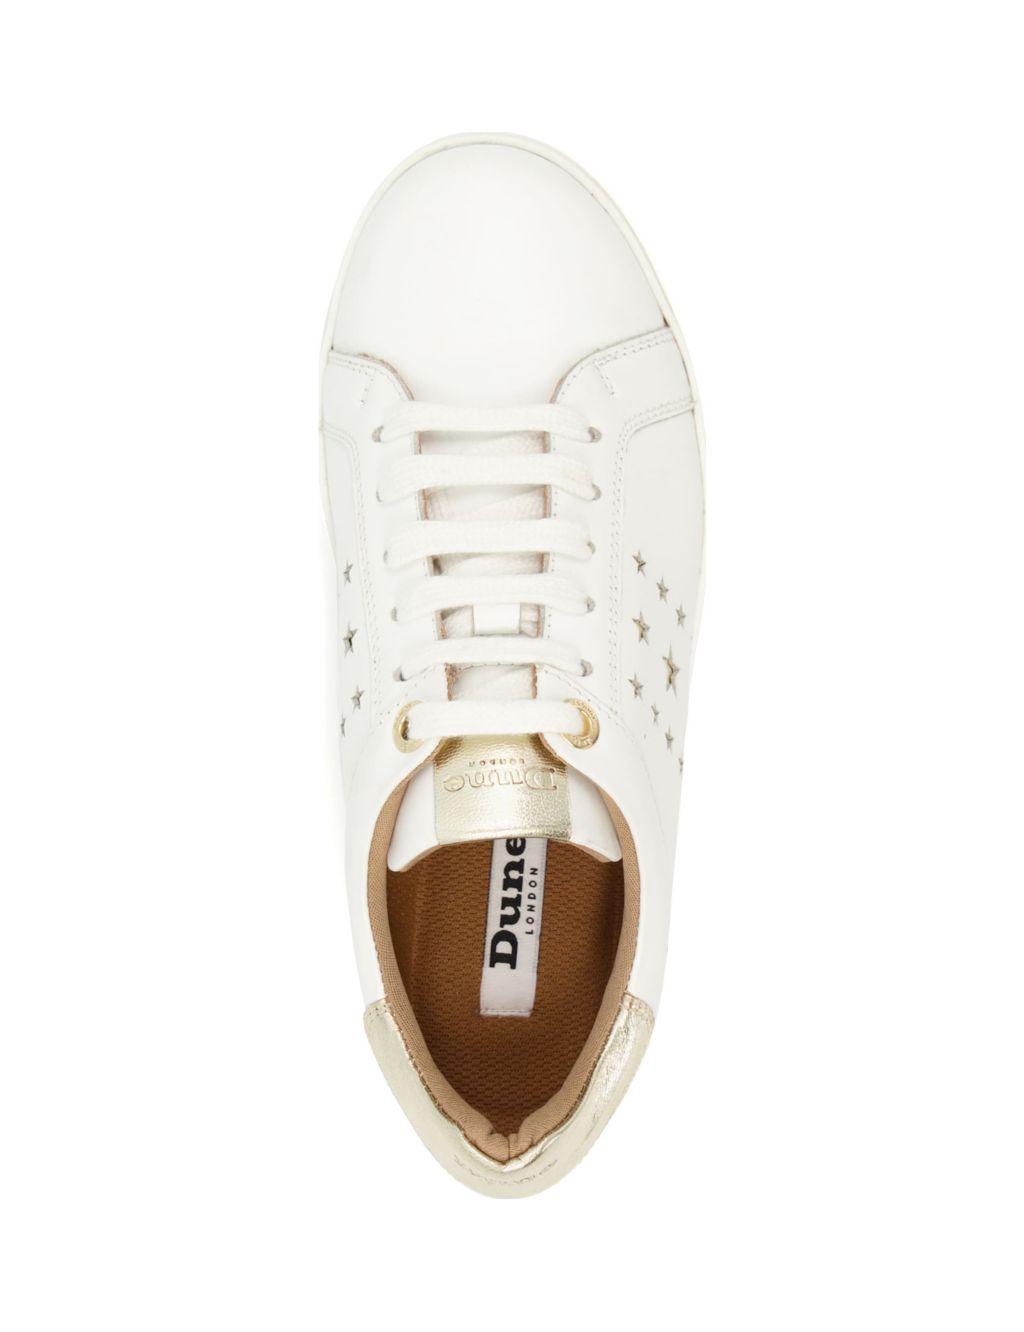 Leather Lace Up Star Trainers image 3